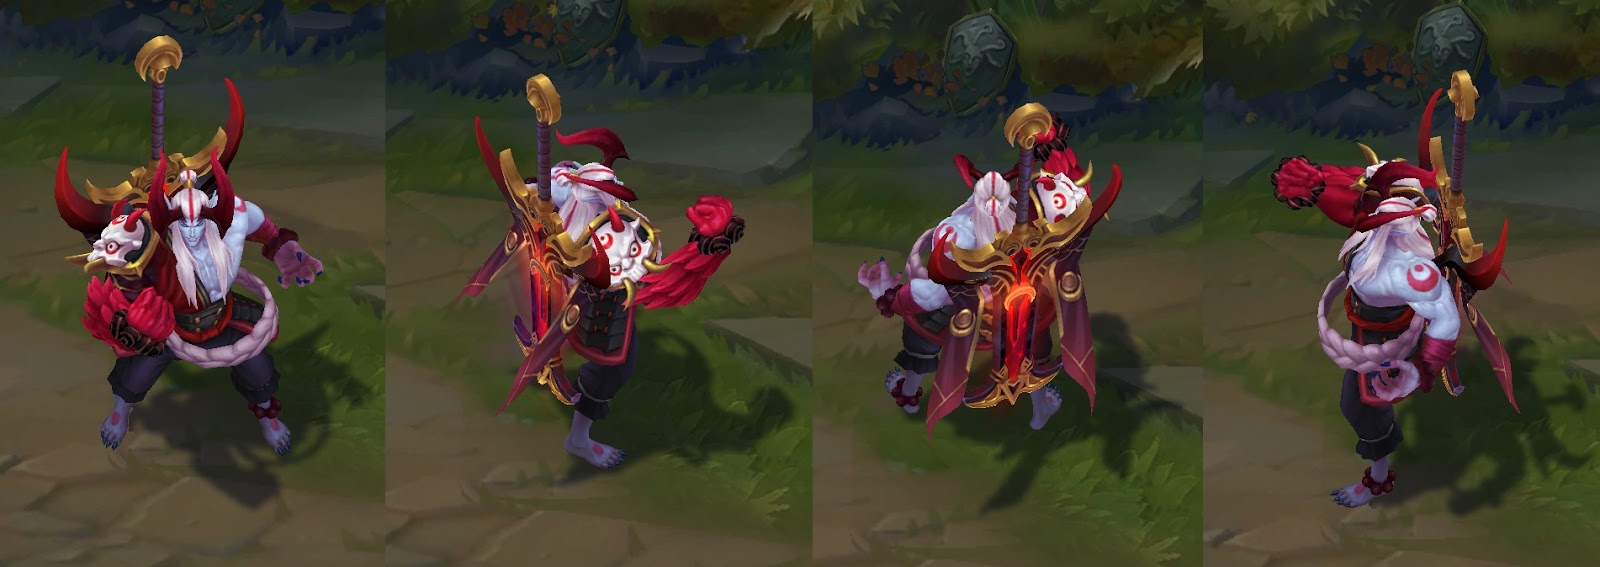 blood moon aatrox skin for league of legends ingame picture